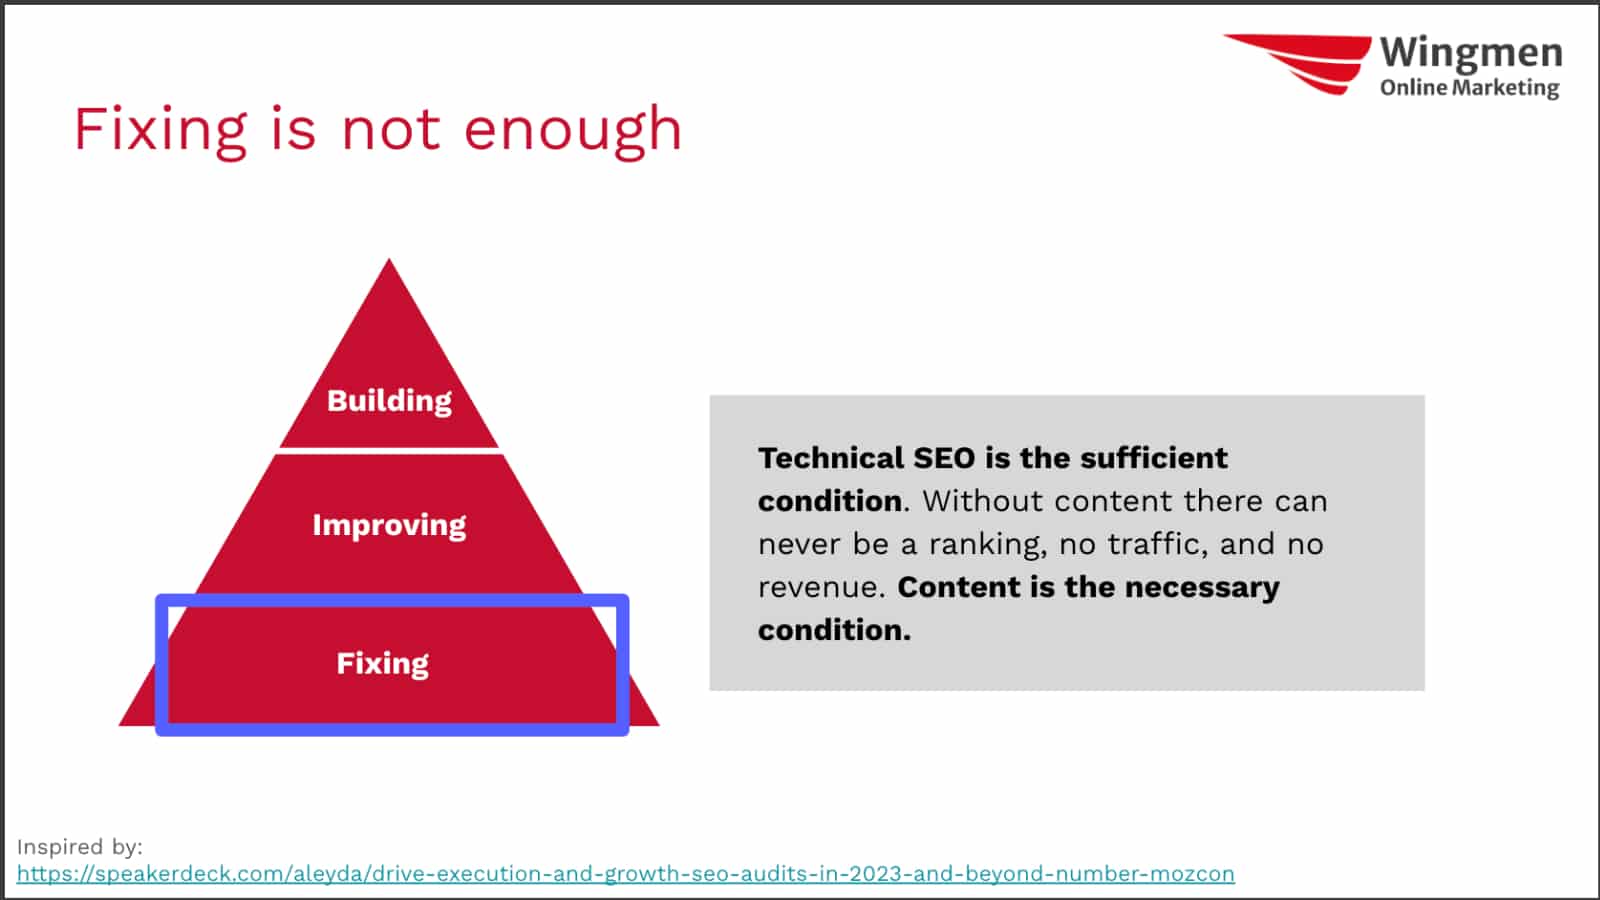 The headline is "Fixing is not enough", showing a pyramid. The lowest part is "fixing", then "improving", and lastly "building". Right next to the pyramid is a text explaining that technical SEO is a sufficient condition, while content is the necessary condition.